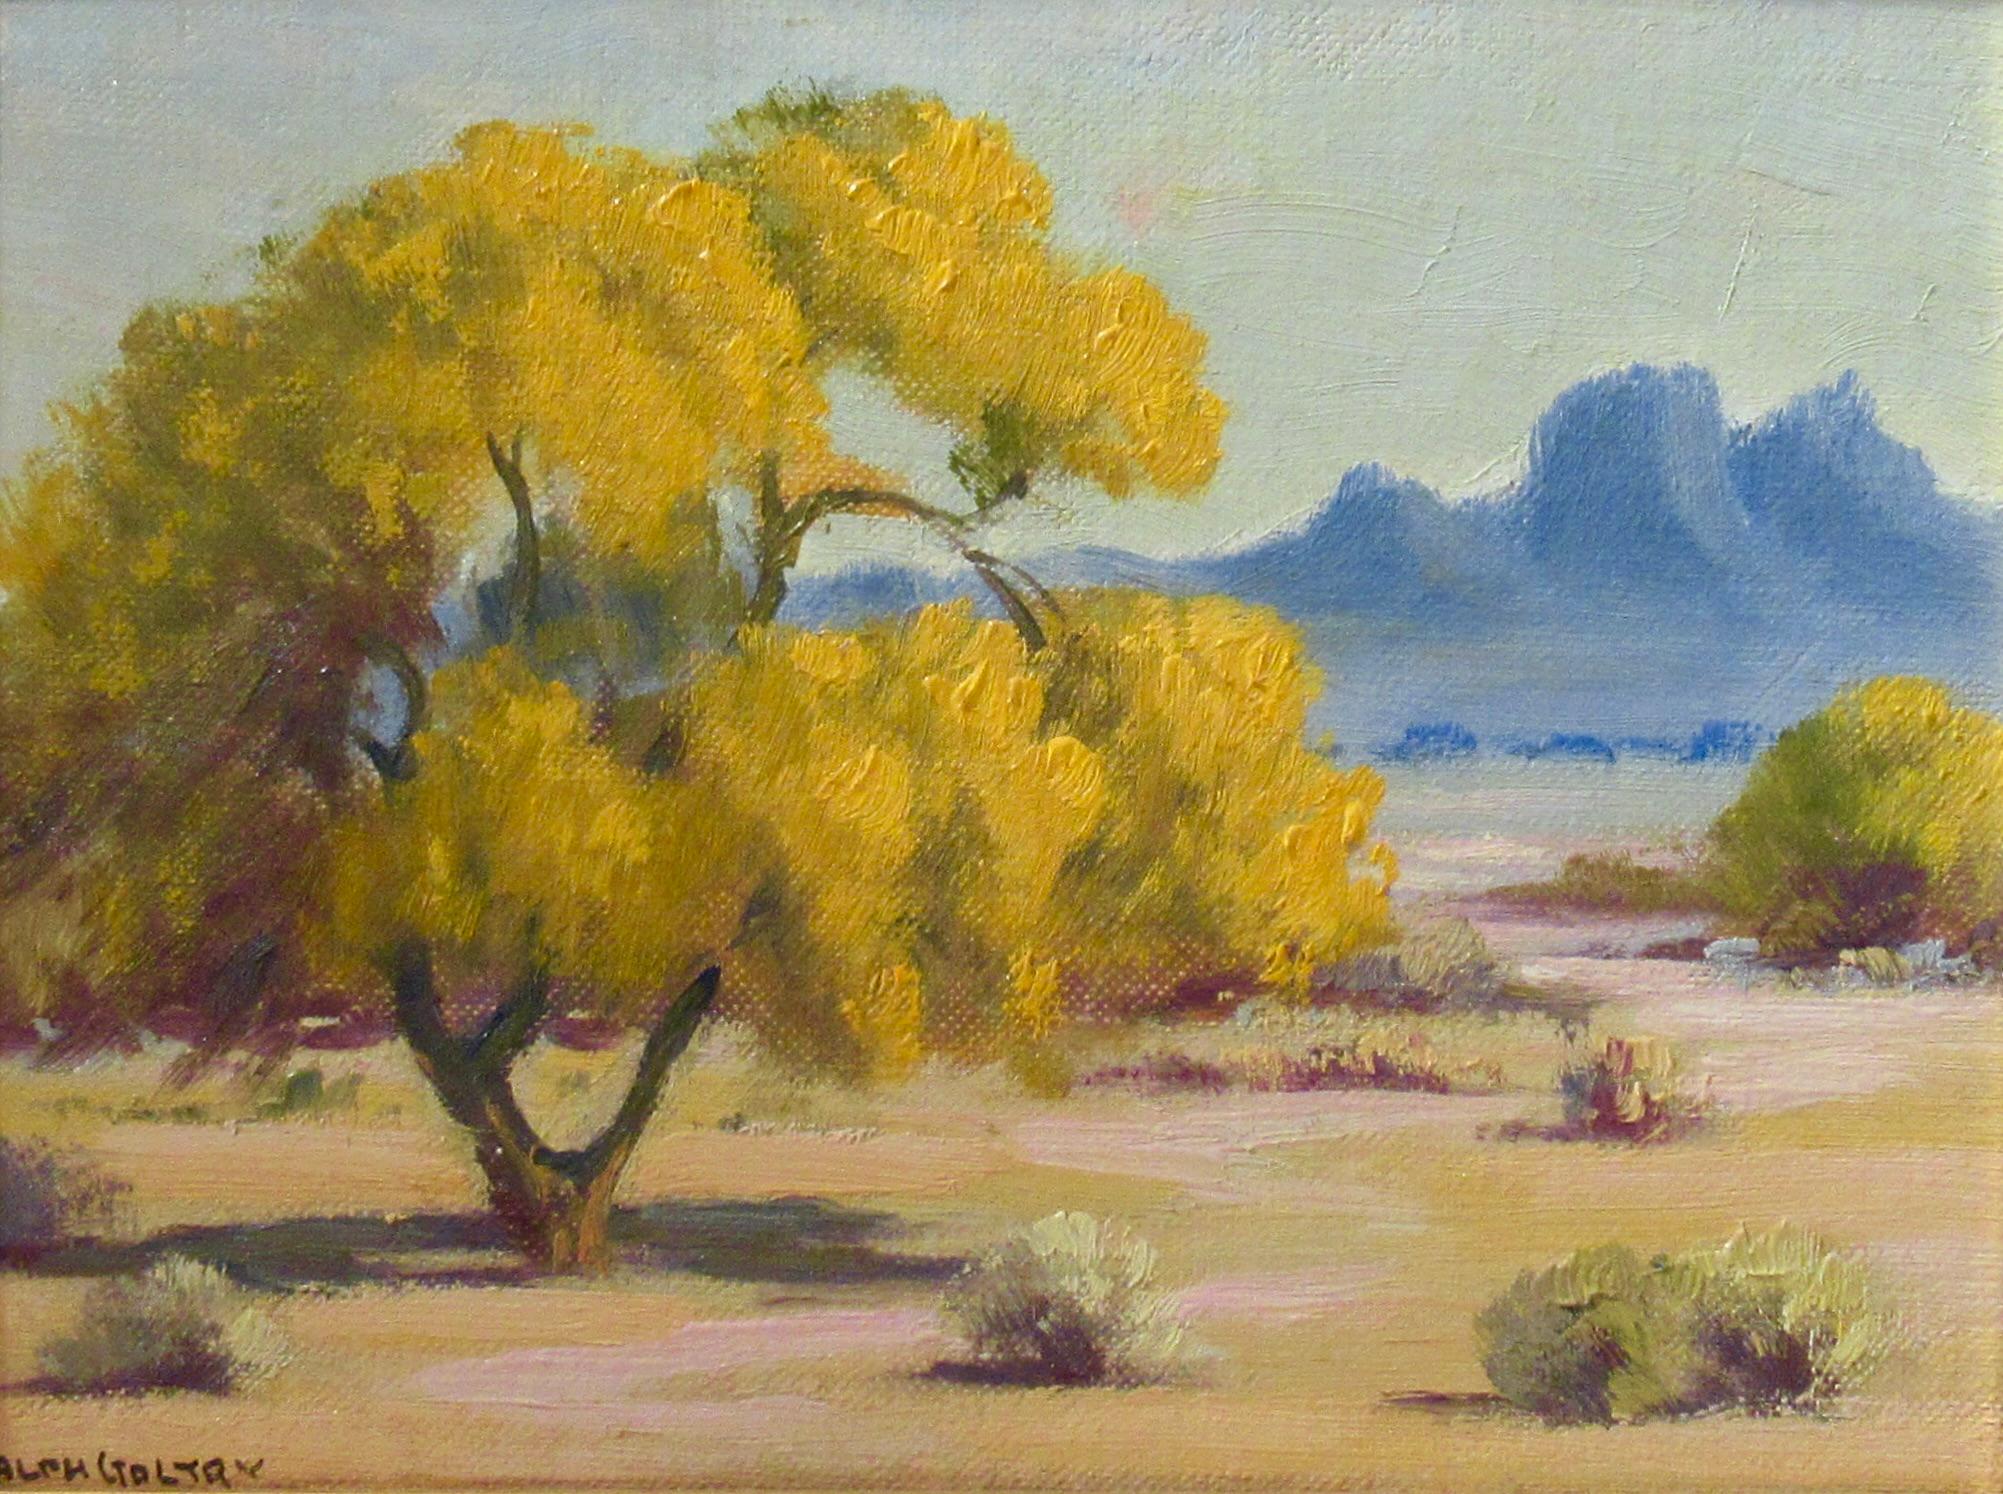 Southwest Landscape - Painting by Ralph Goltry